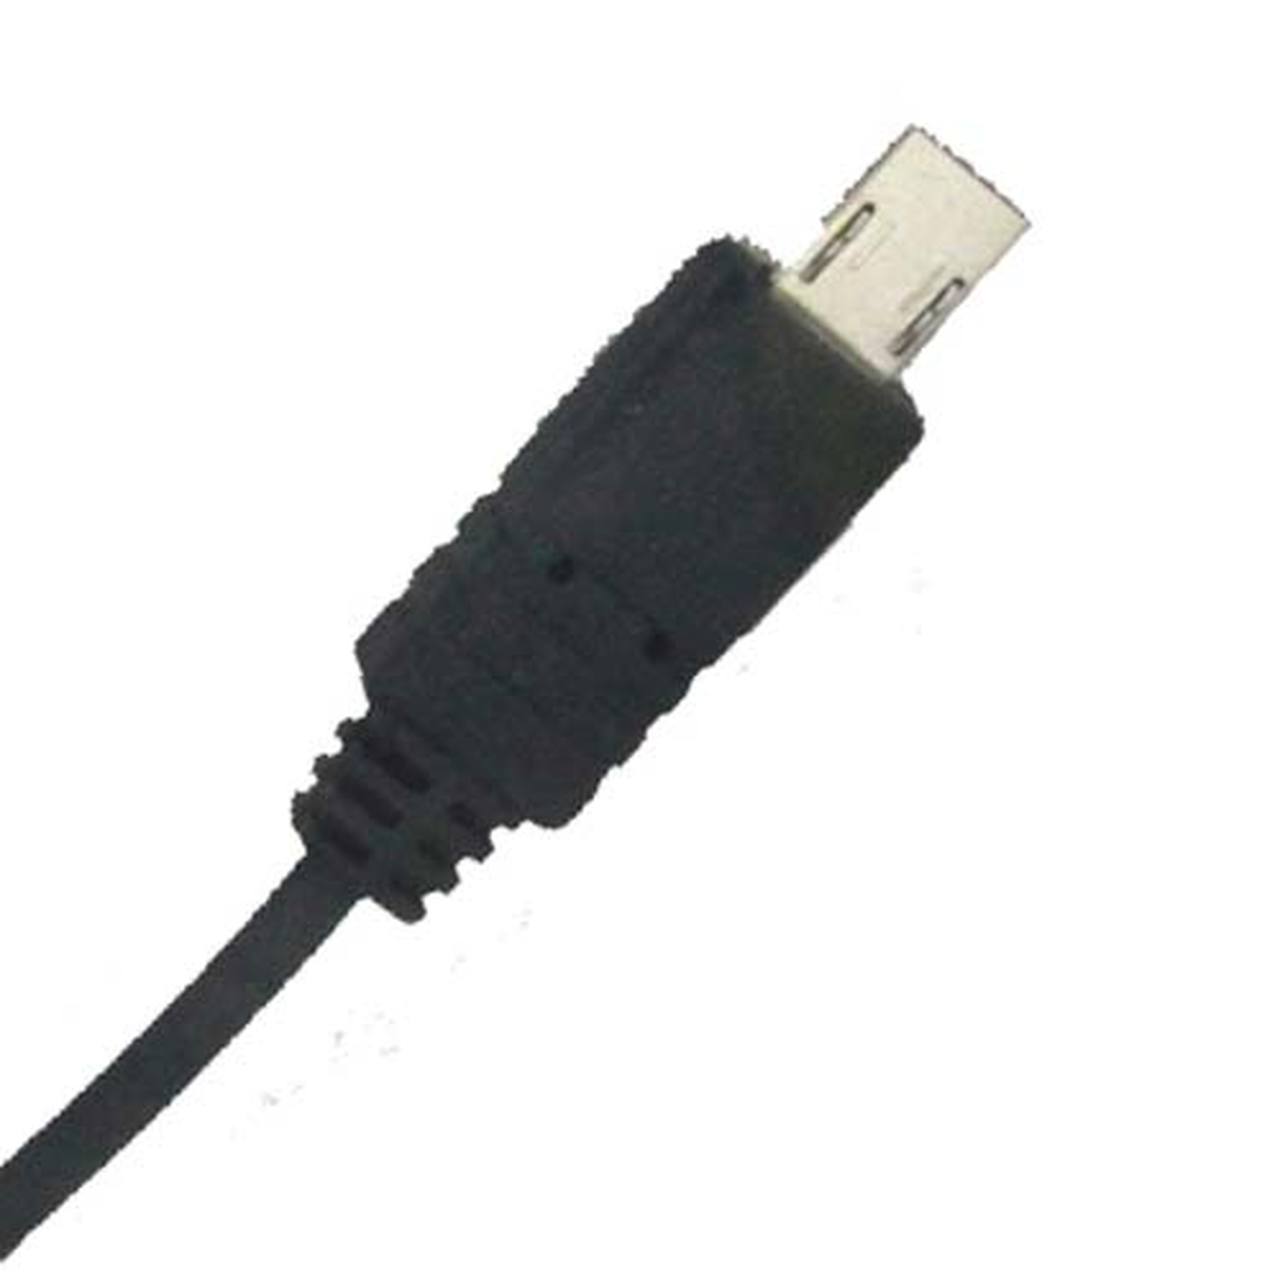 Promaster 9640 Camera Release Cable for Sony Multi-Terminal Connector (requires remote)